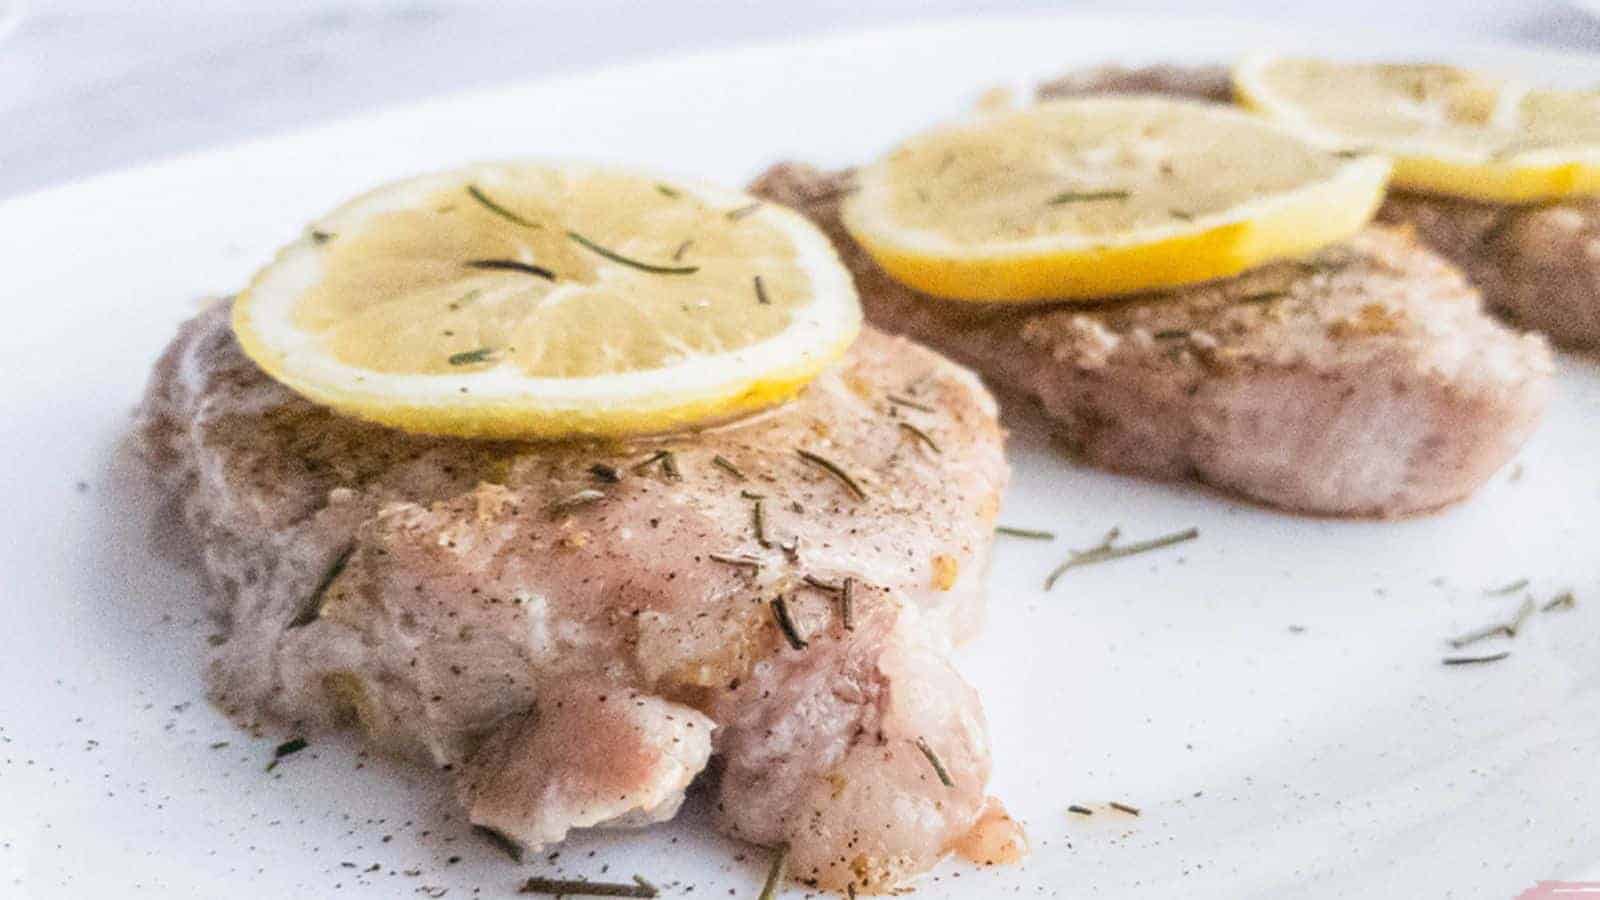 A picture of Lemon Pepper Pork Chops with rosemary garnish.